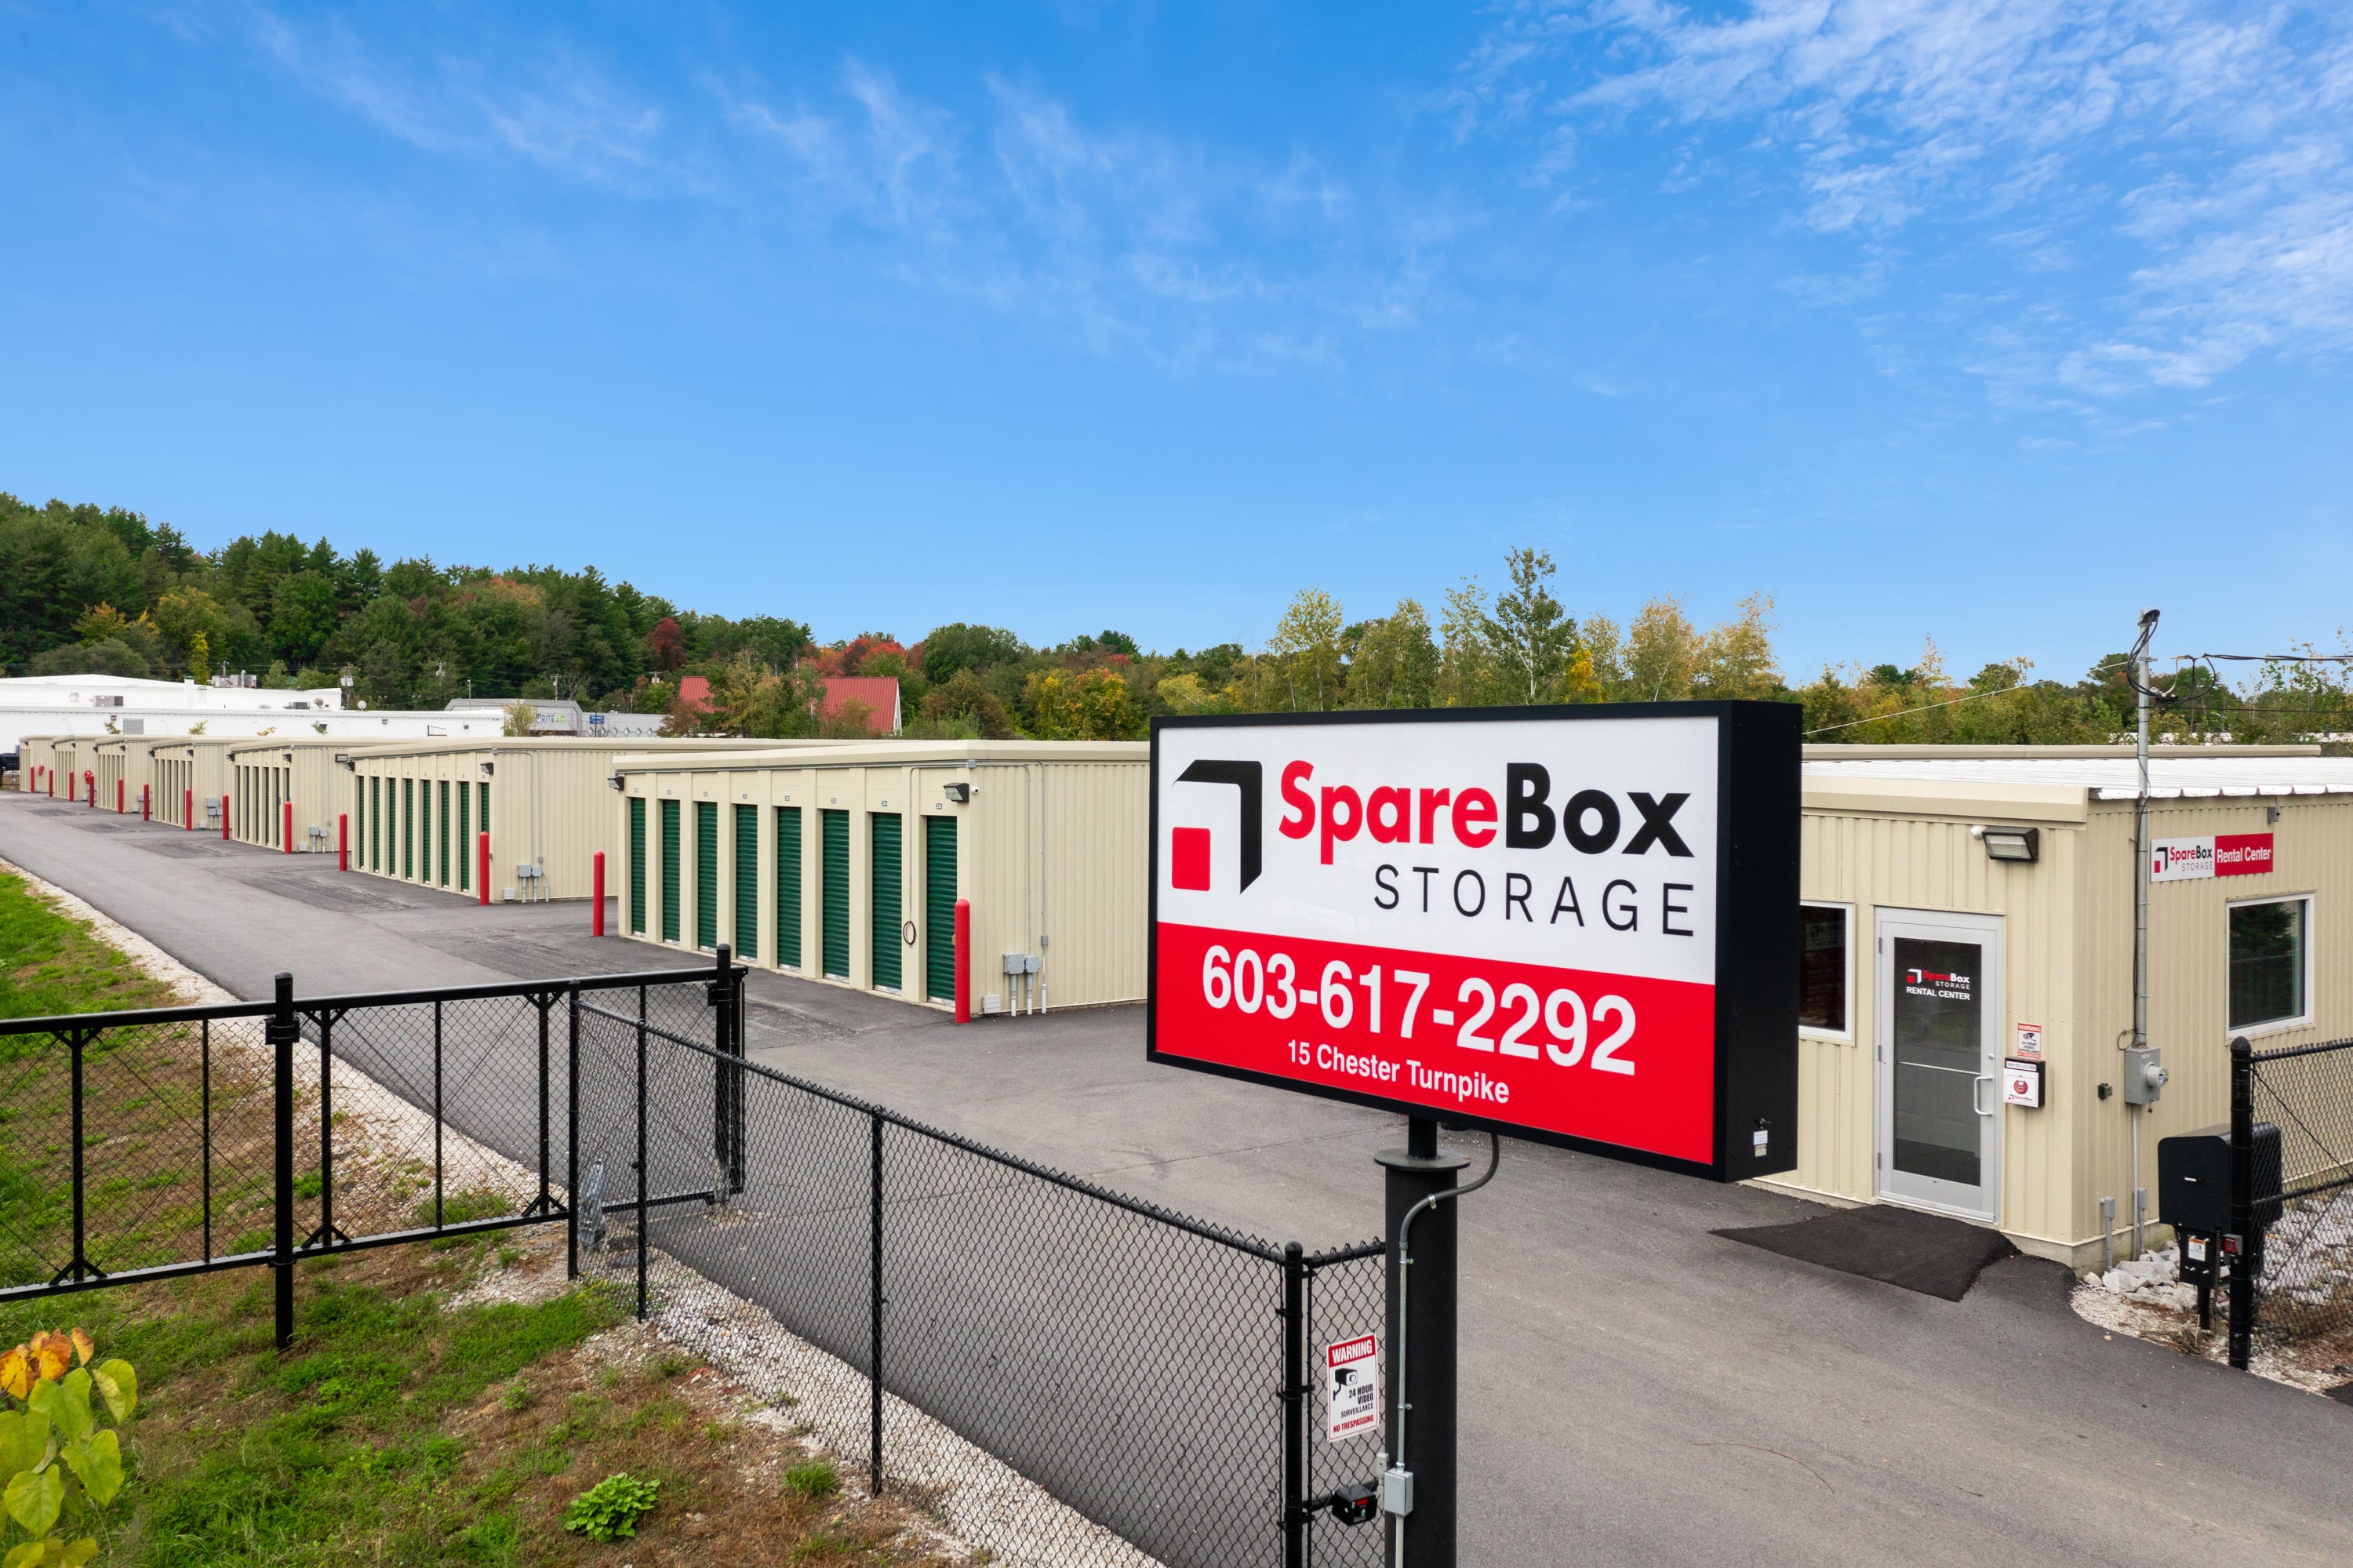 SpareBox in Allenstown, NH has multiple self-storage unit sizes and options | SpareBox Storage